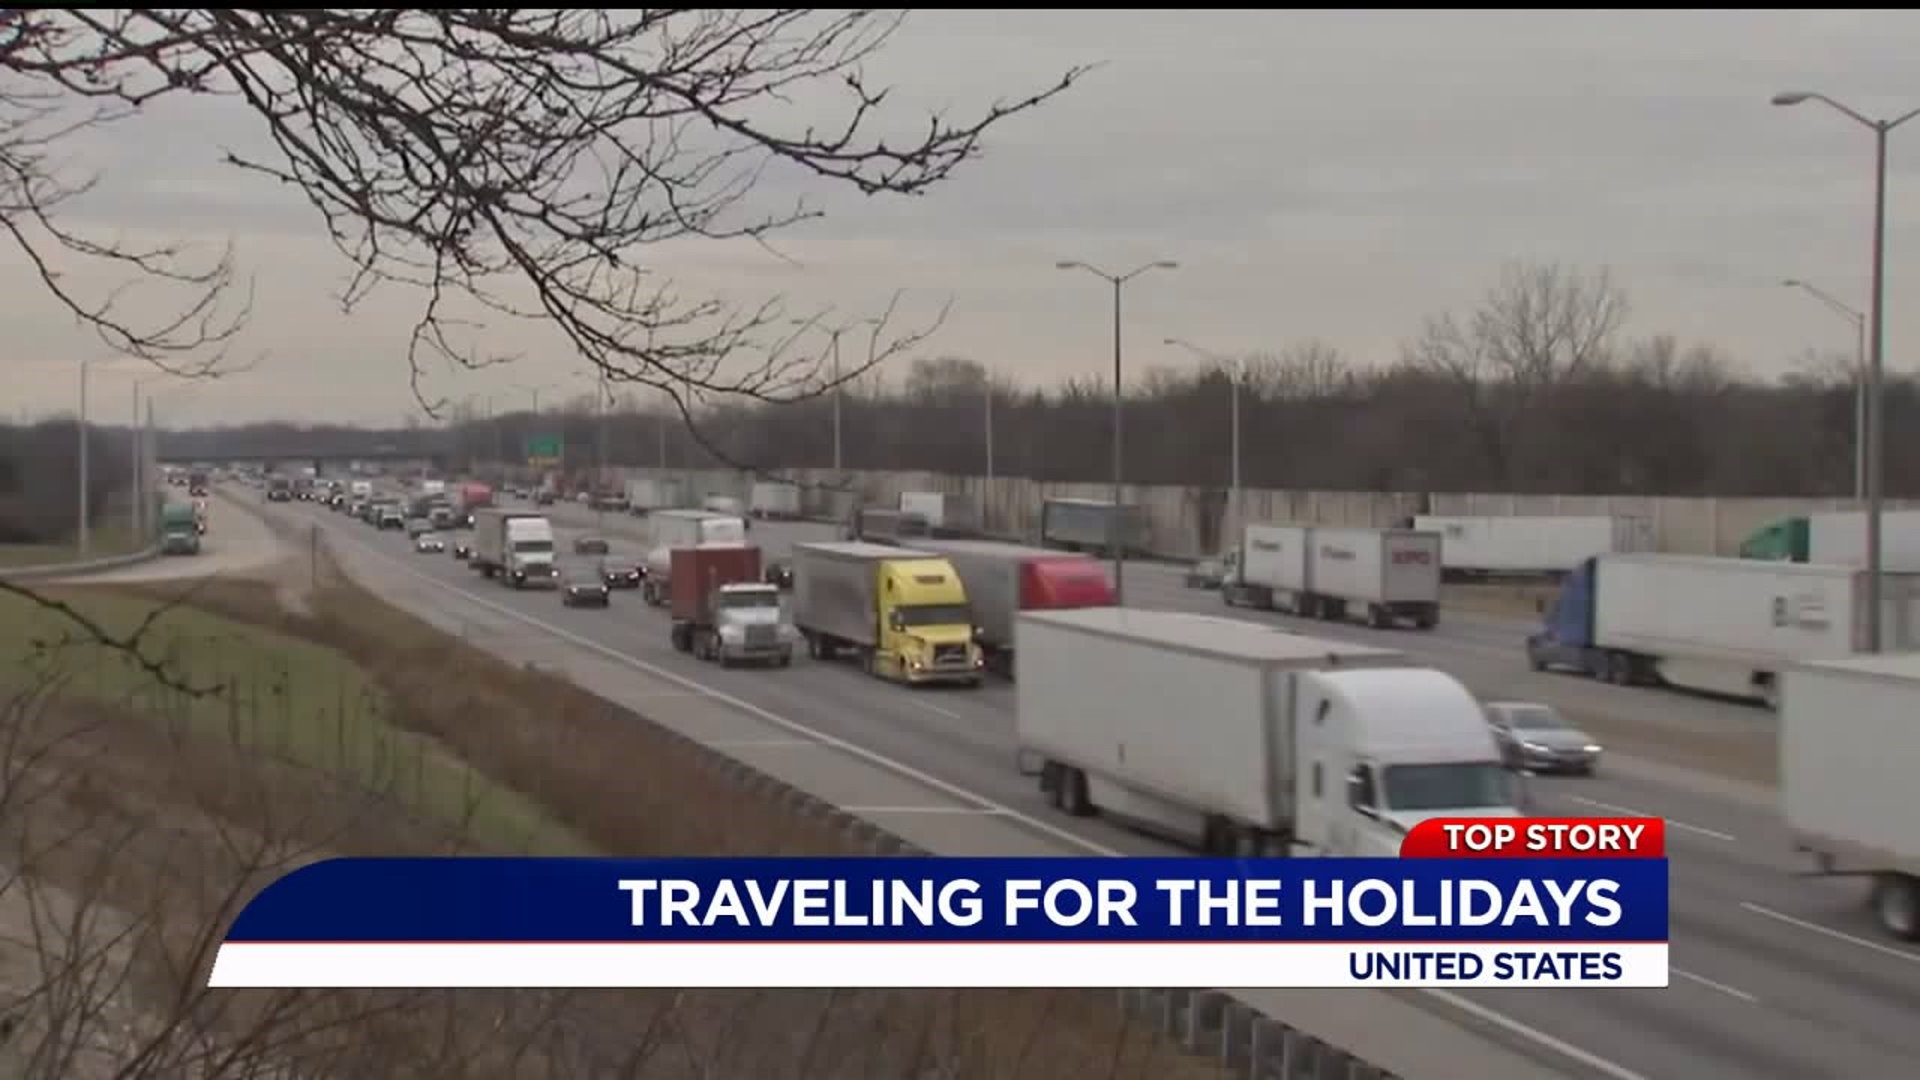 State police increasing highway enforcement during holiday travel season; urging public to drive responsibly